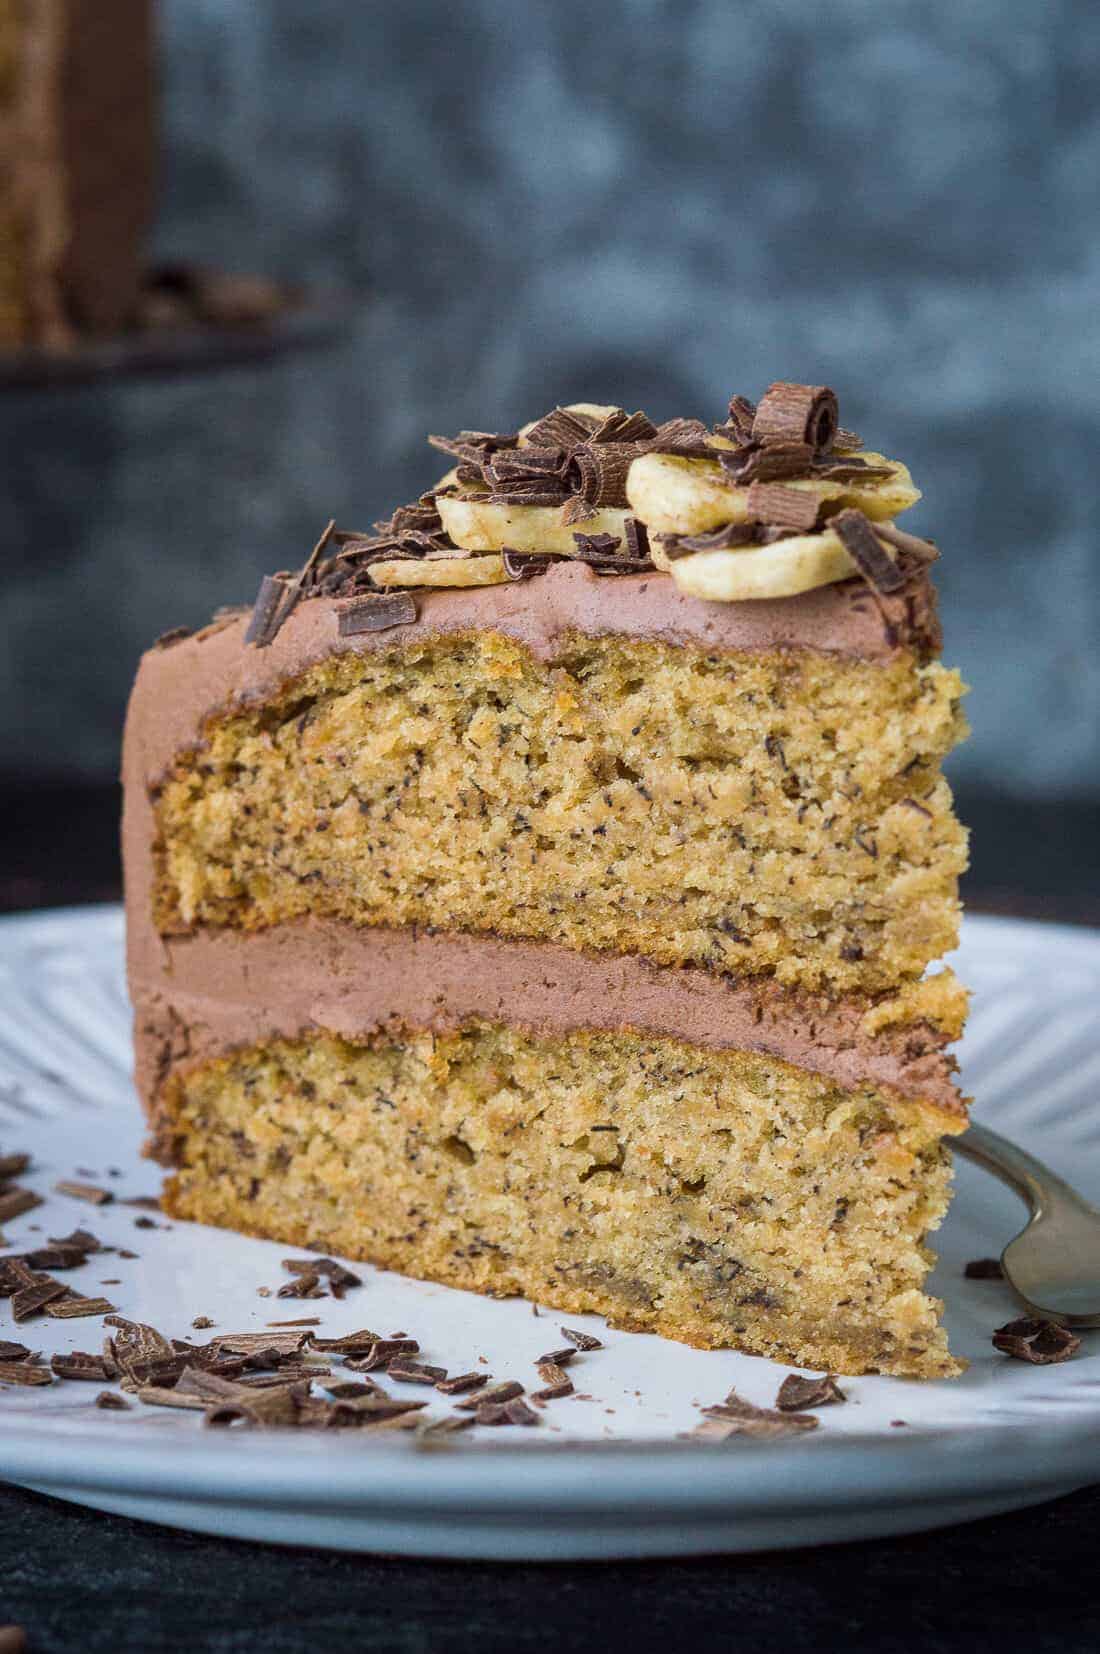 Vegan Banana Cake with Chocolate Peanut Butter Frosting